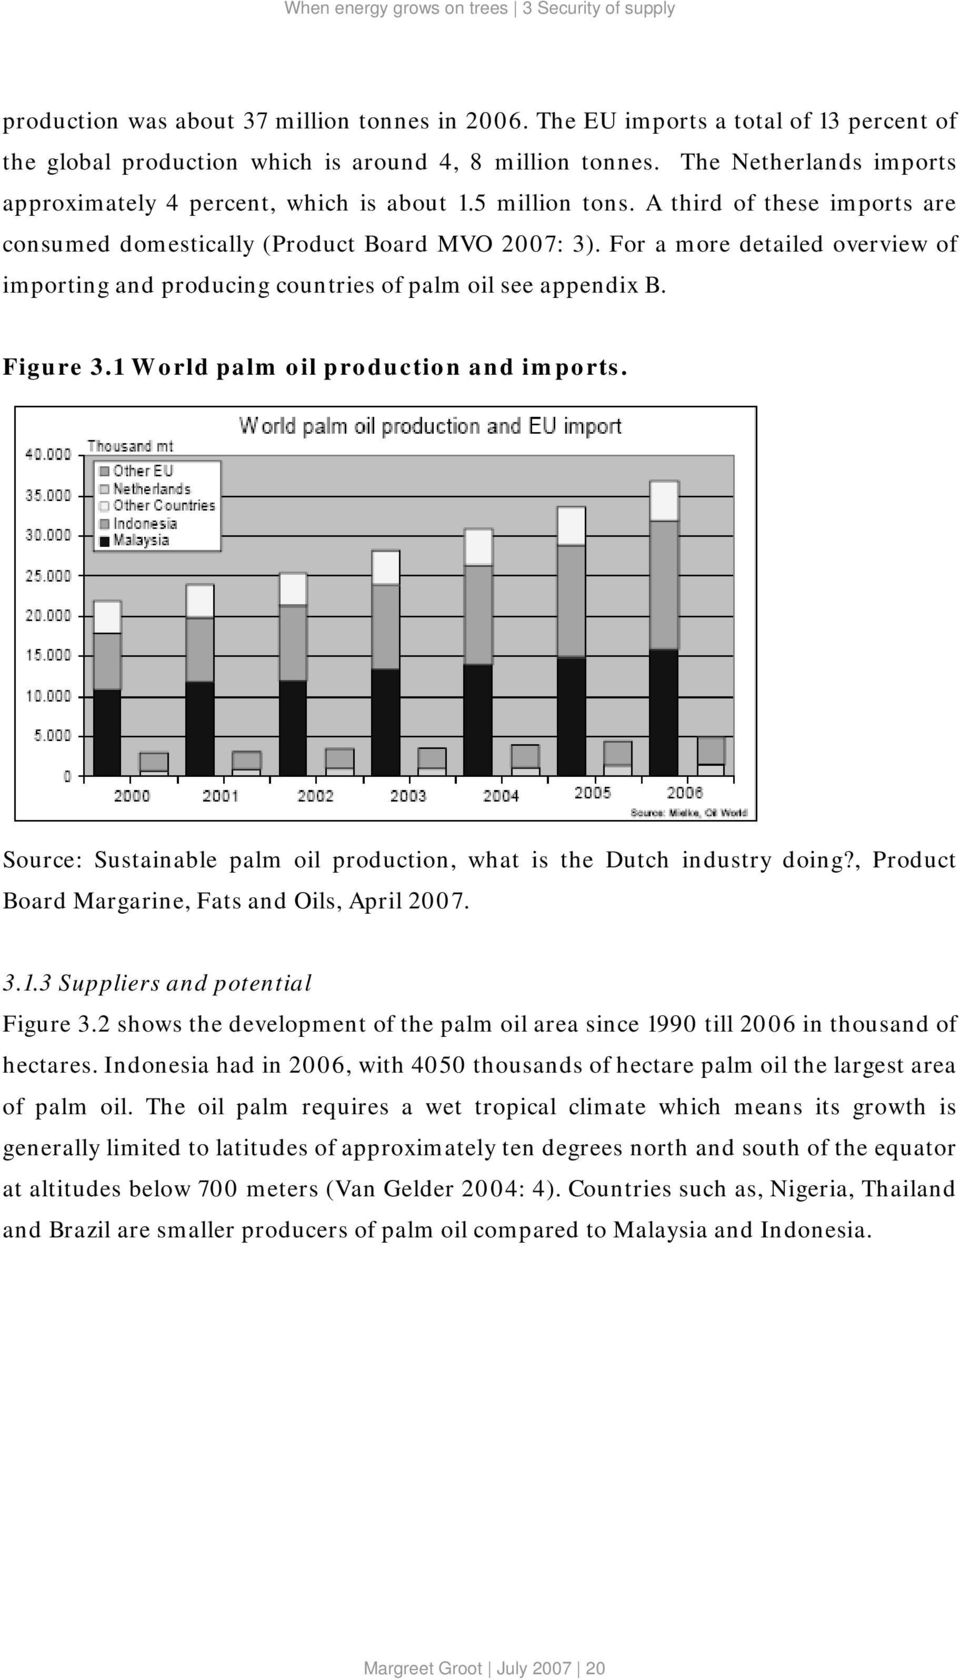 For a more detailed overview of importing and producing countries of palm oil see appendix B. Figure 3.1 World palm oil production and imports.